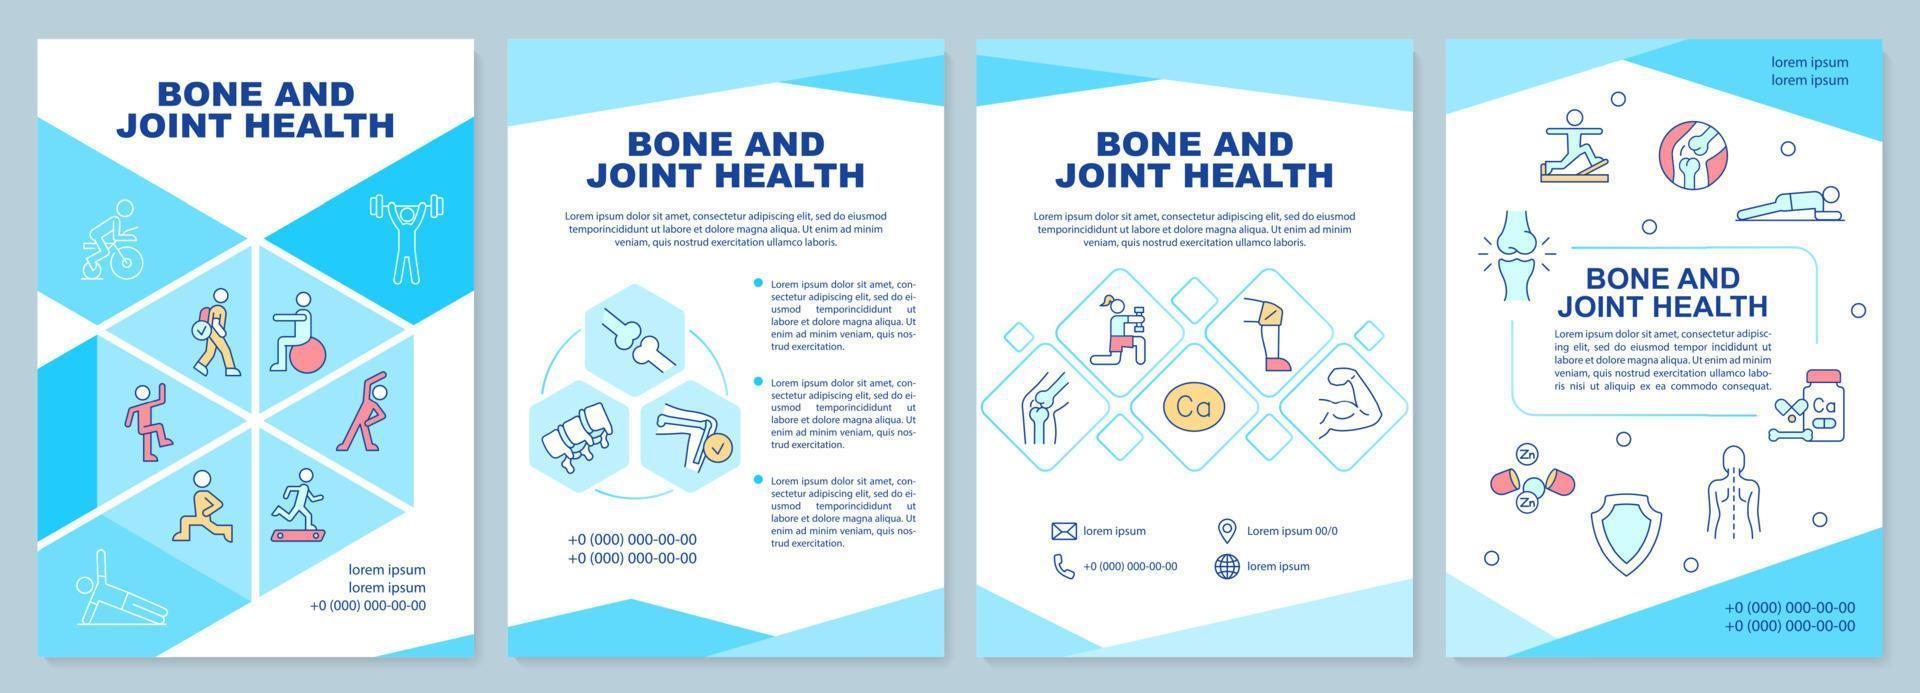 Bone and joint health blue brochure template vector